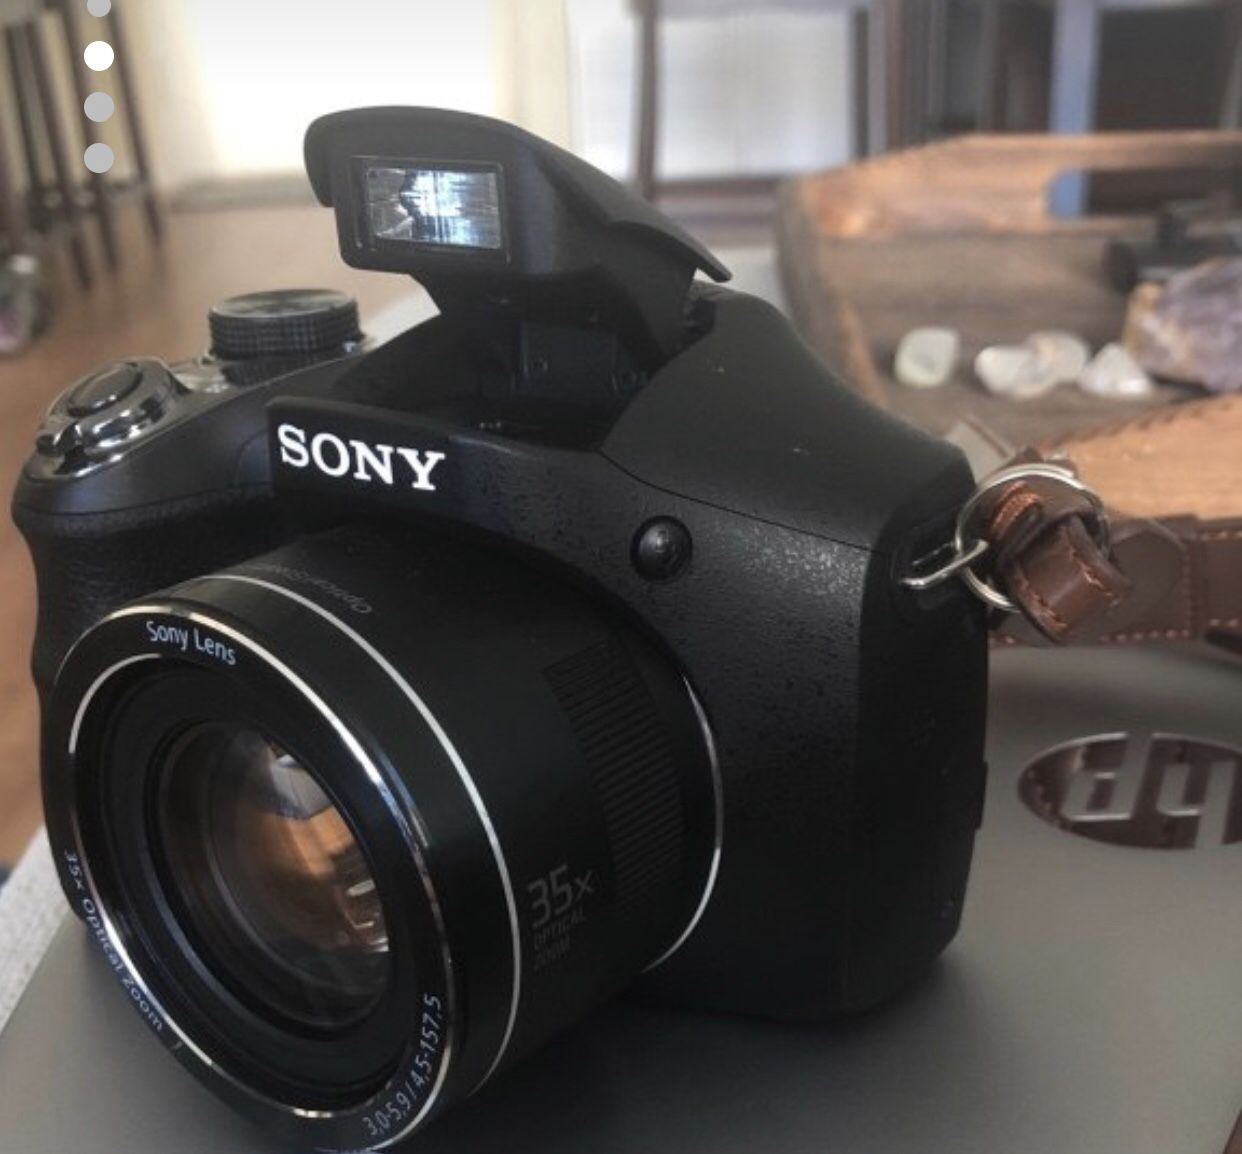 Sony DSC-H300 Camera DSLR Point and Shoot